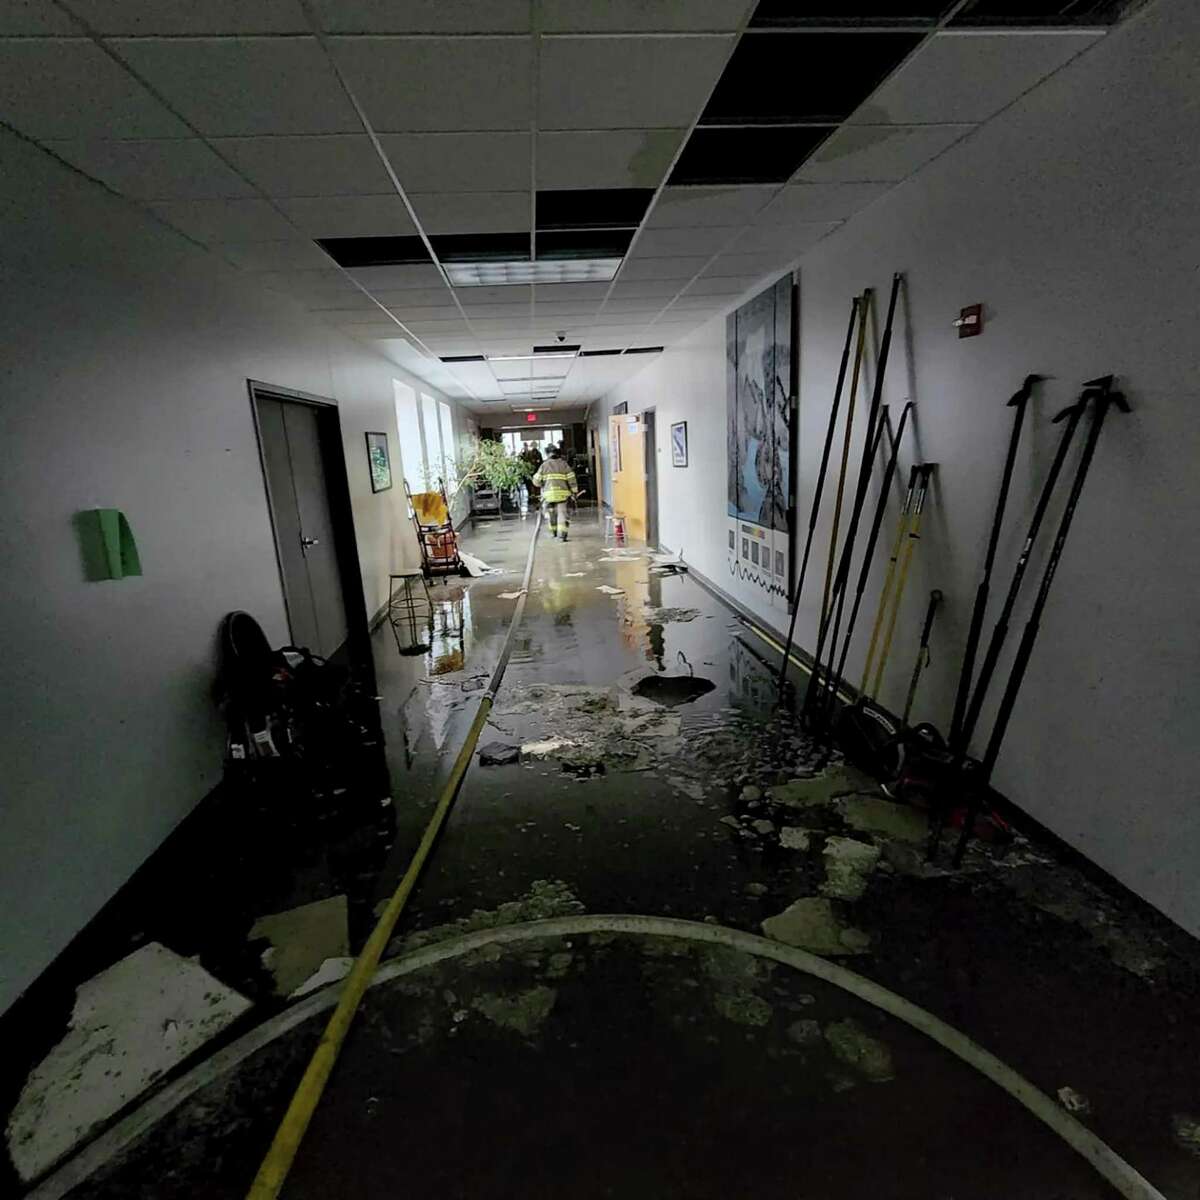 A hallway at New Milford High School sustained water damage after Tuesday’s roof fire.